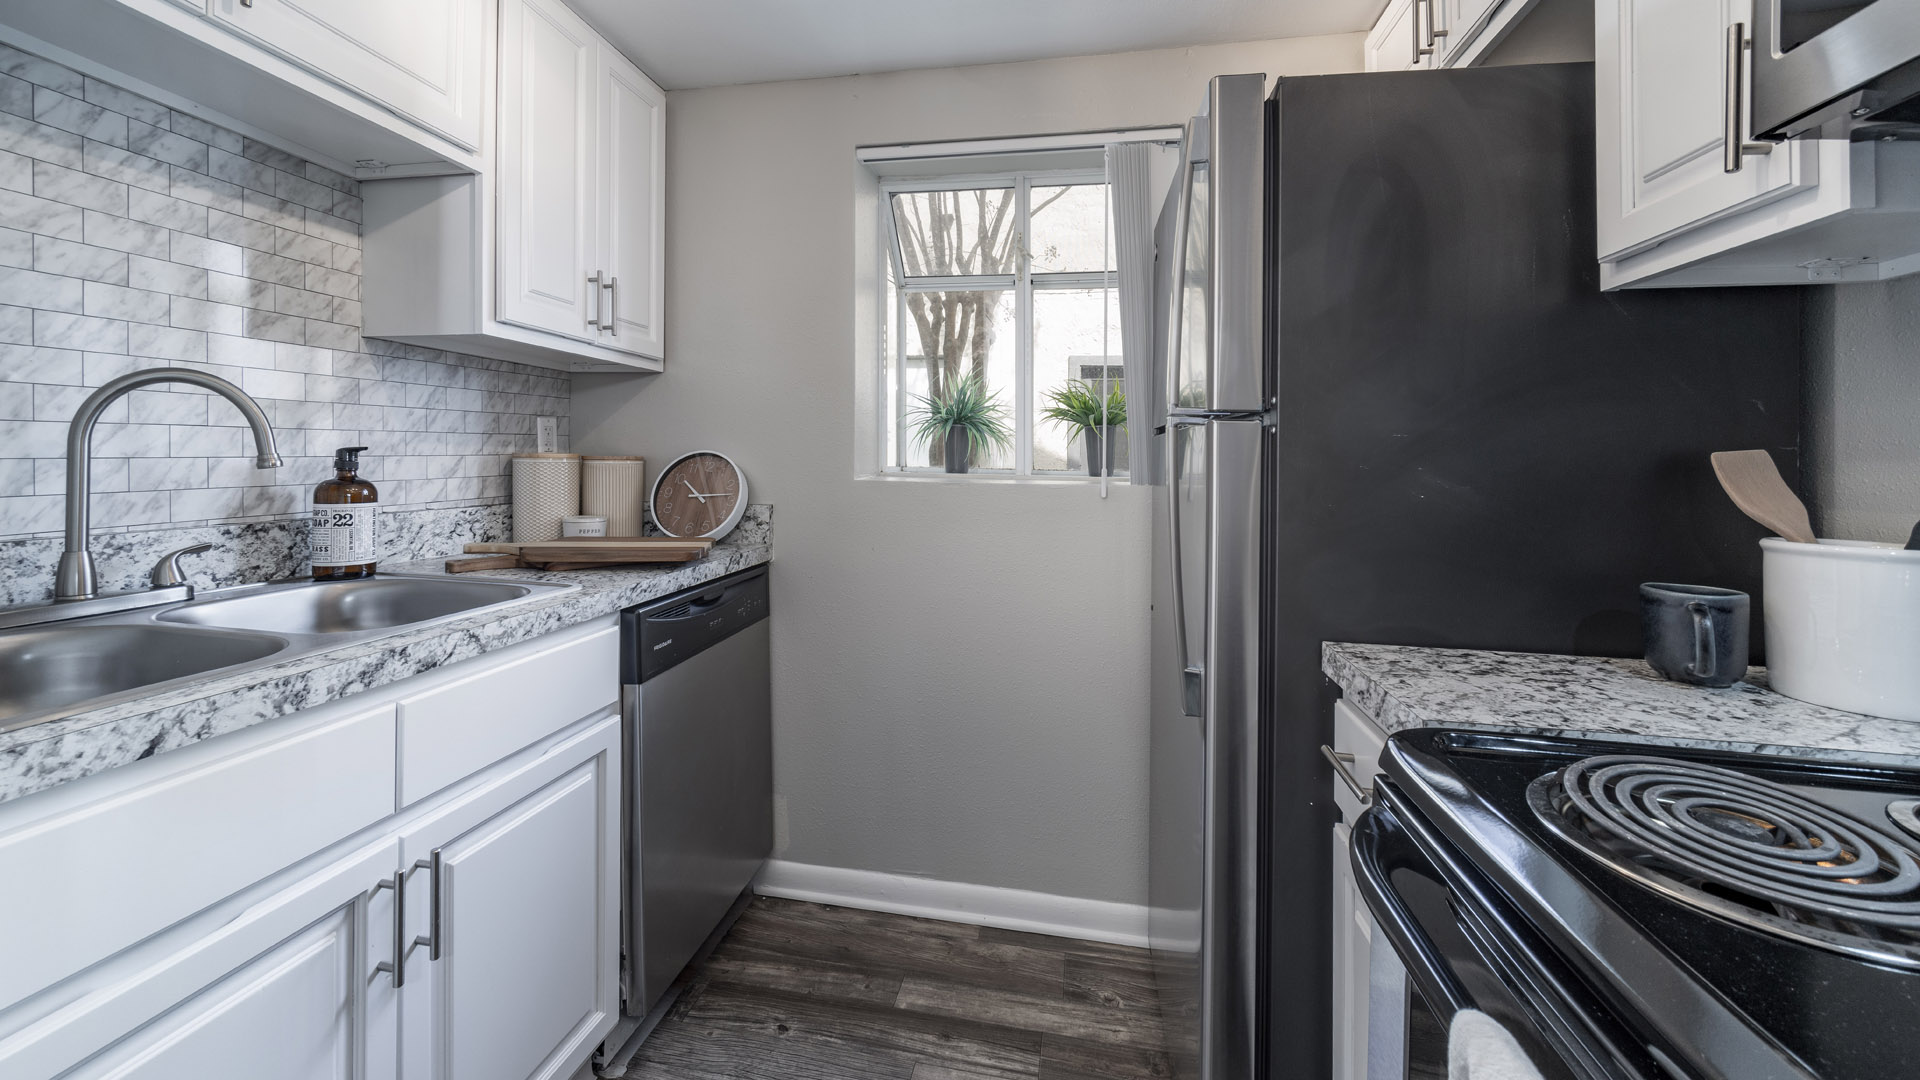 Renovated luxury kitchen with granite-style countertops and stainless steel appliances